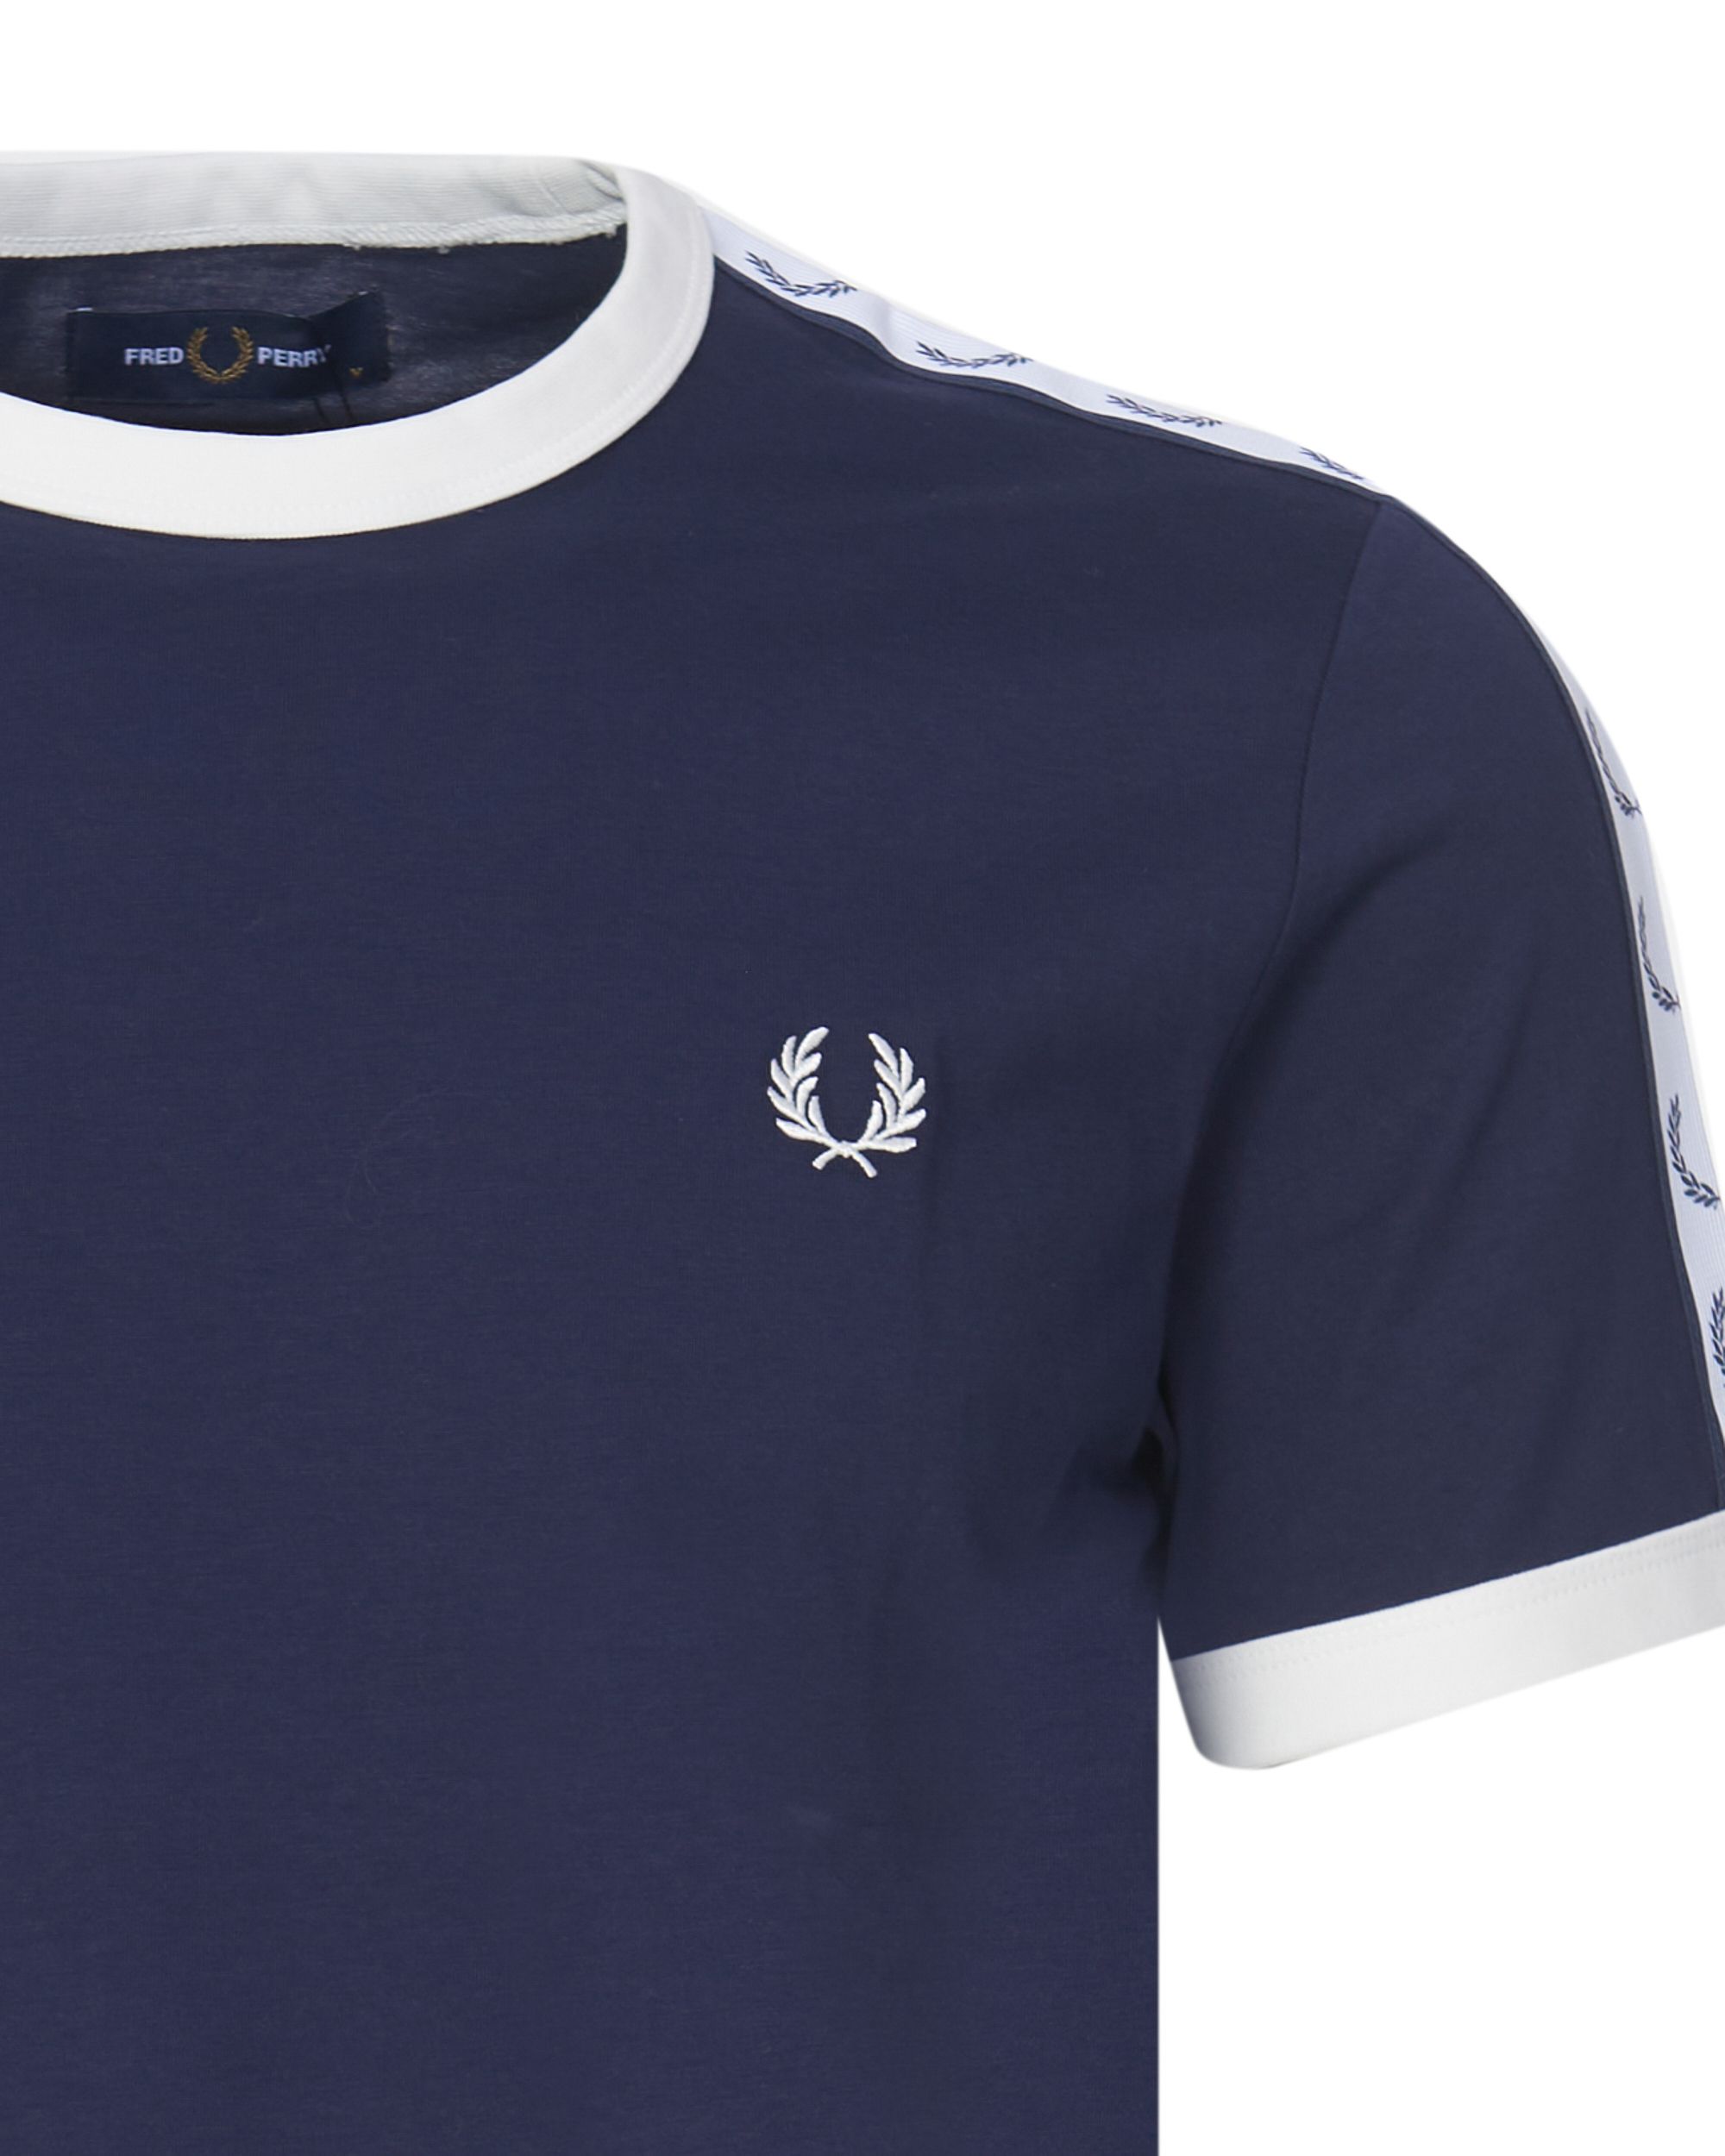 Fred Perry Polo KM Donker blauw 080354-001-L